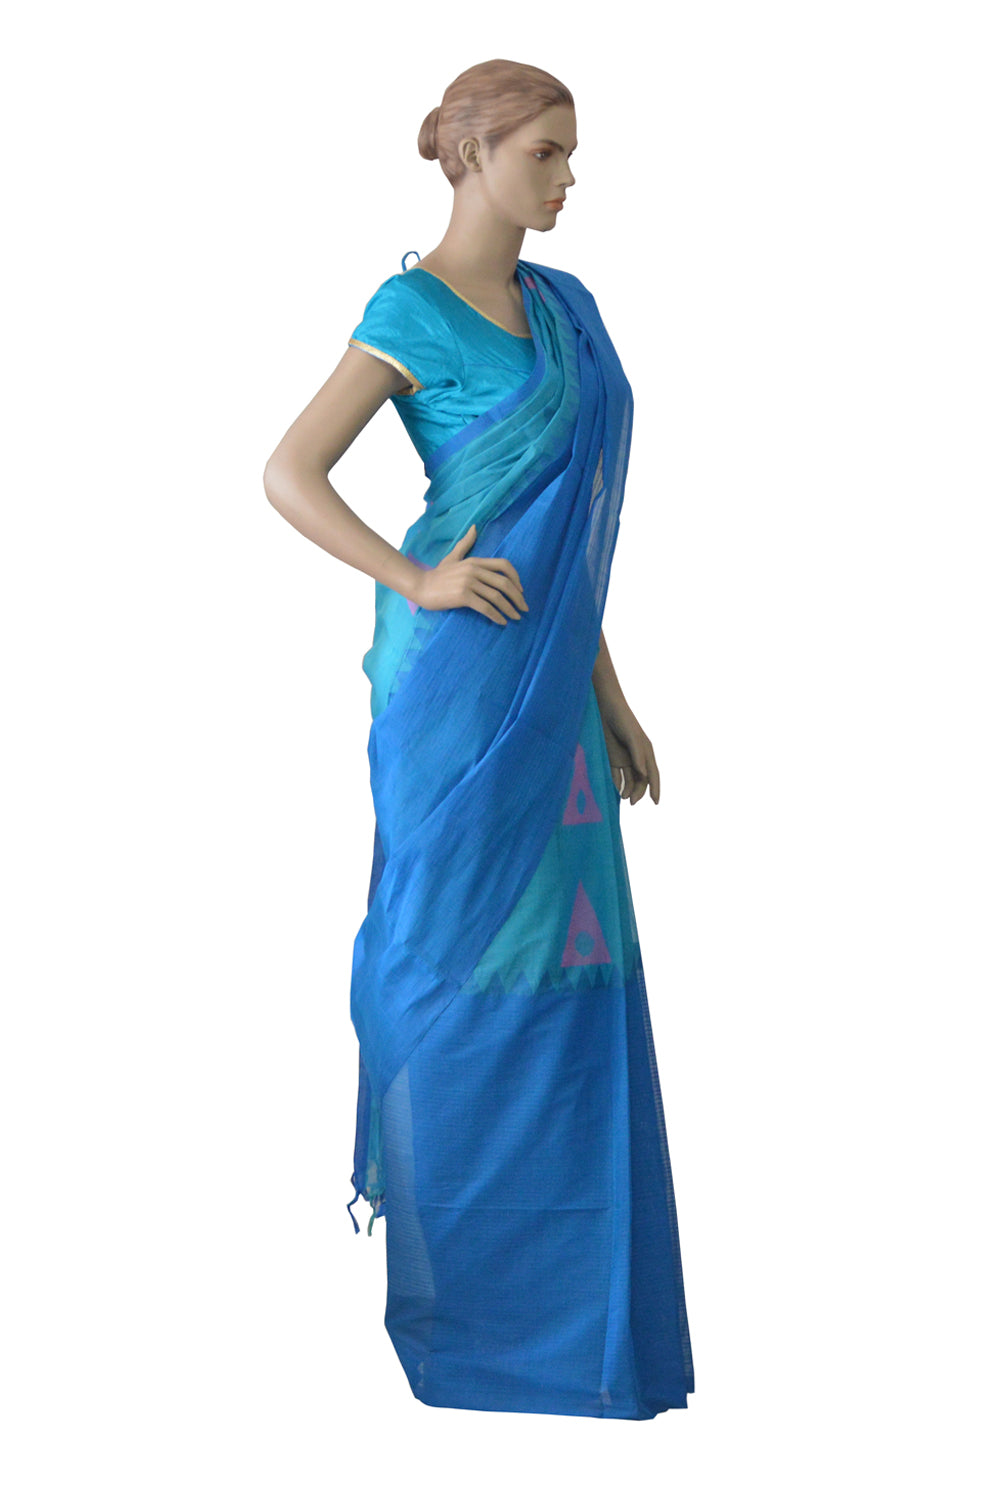 Southloom™ Premium Handloom South Cotton Blue Saree With Temple Design